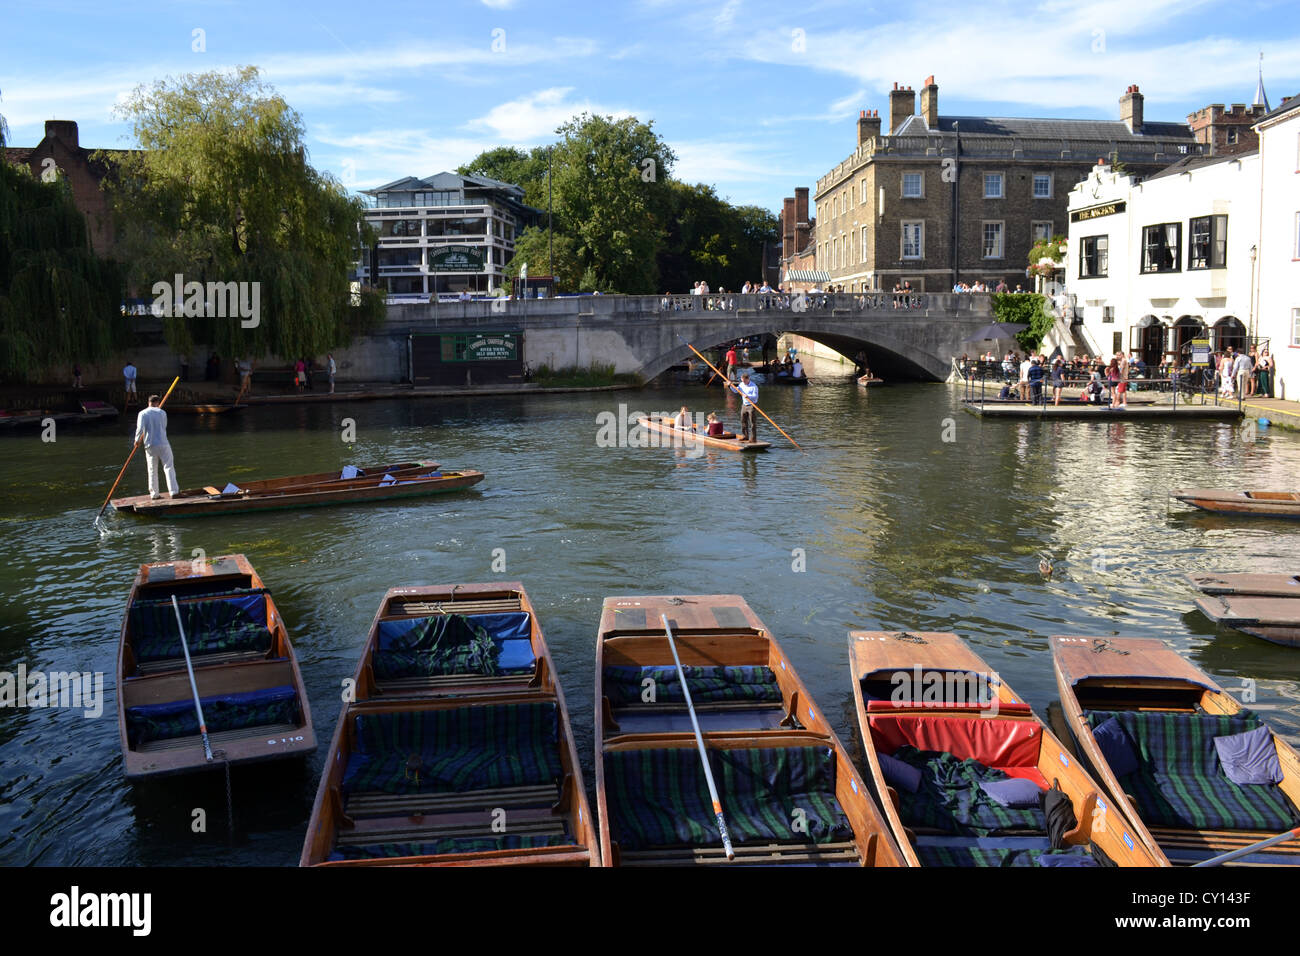 Punting a Cambridge, Inghilterra. Foto Stock